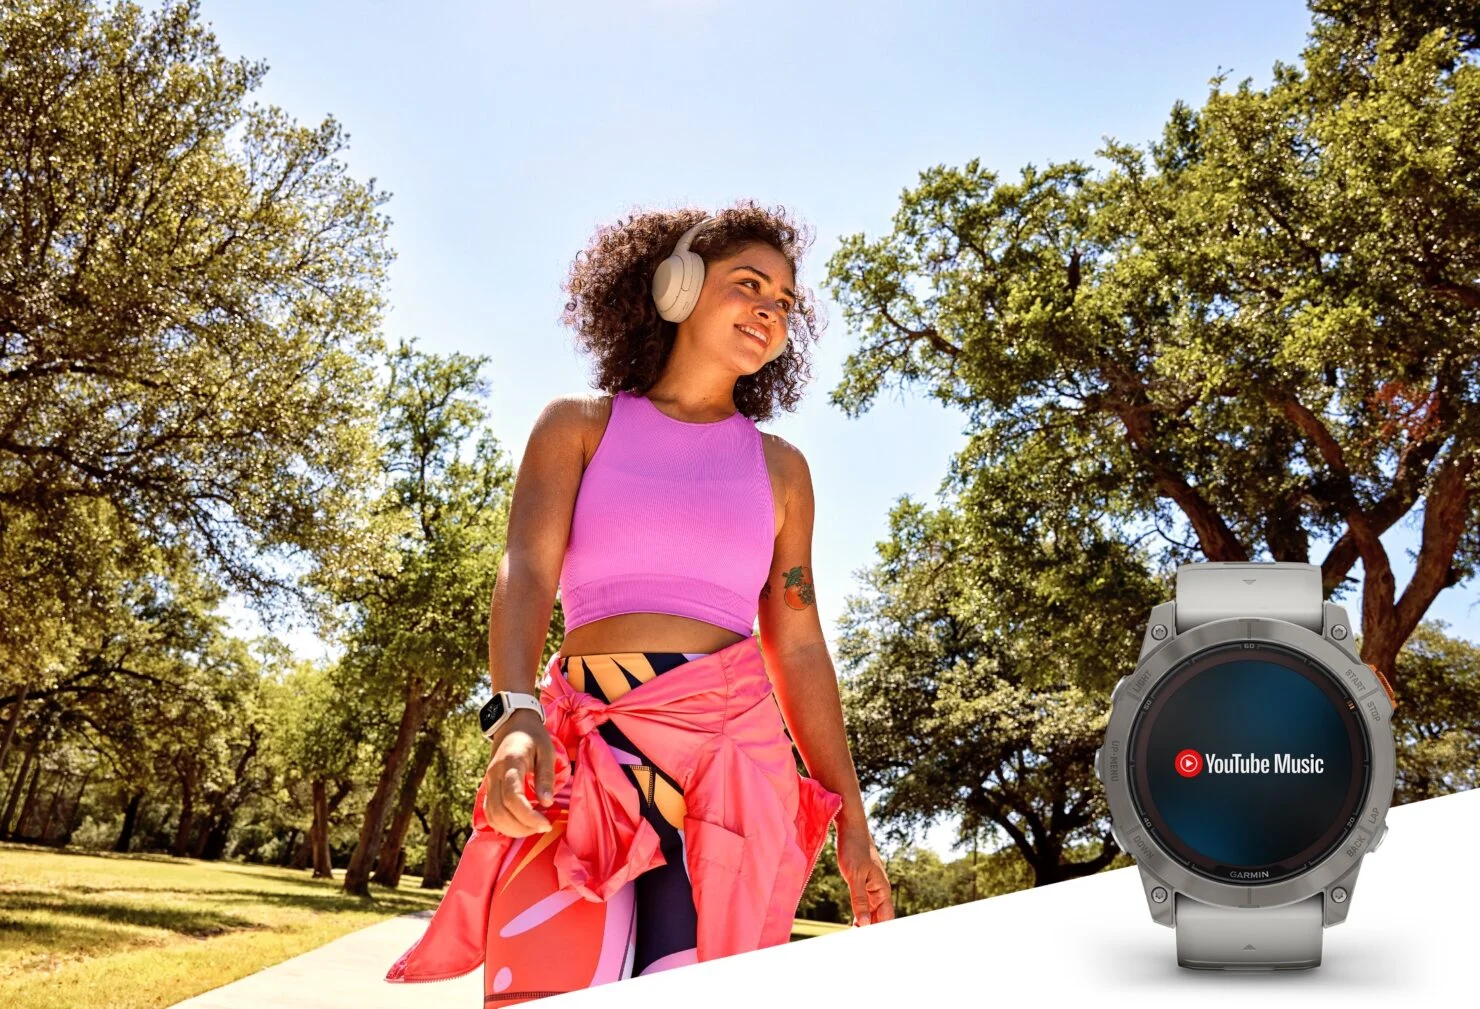 YouTube music now available on Garmin Smartwatches